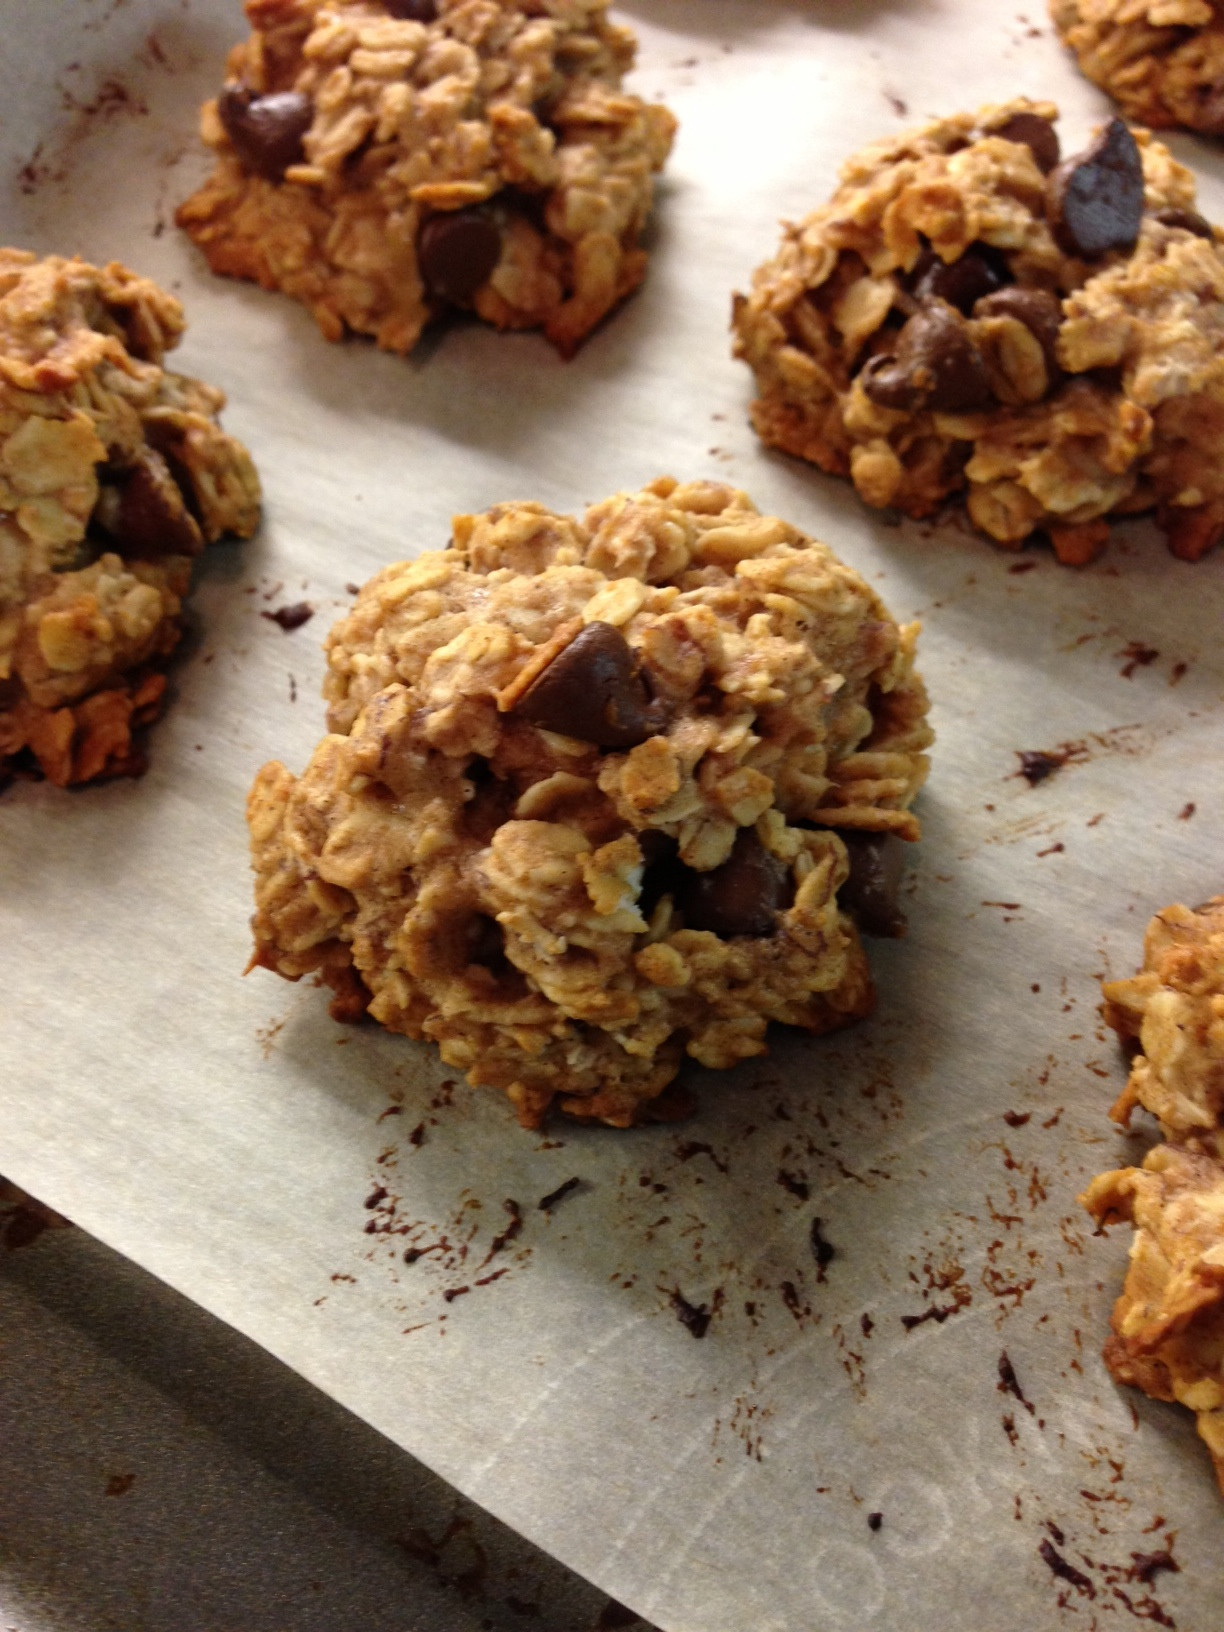 Oatmeal Cookies Healthy the 20 Best Ideas for Healthy Oatmeal Chocolate Chip Cookies Lauren Follett